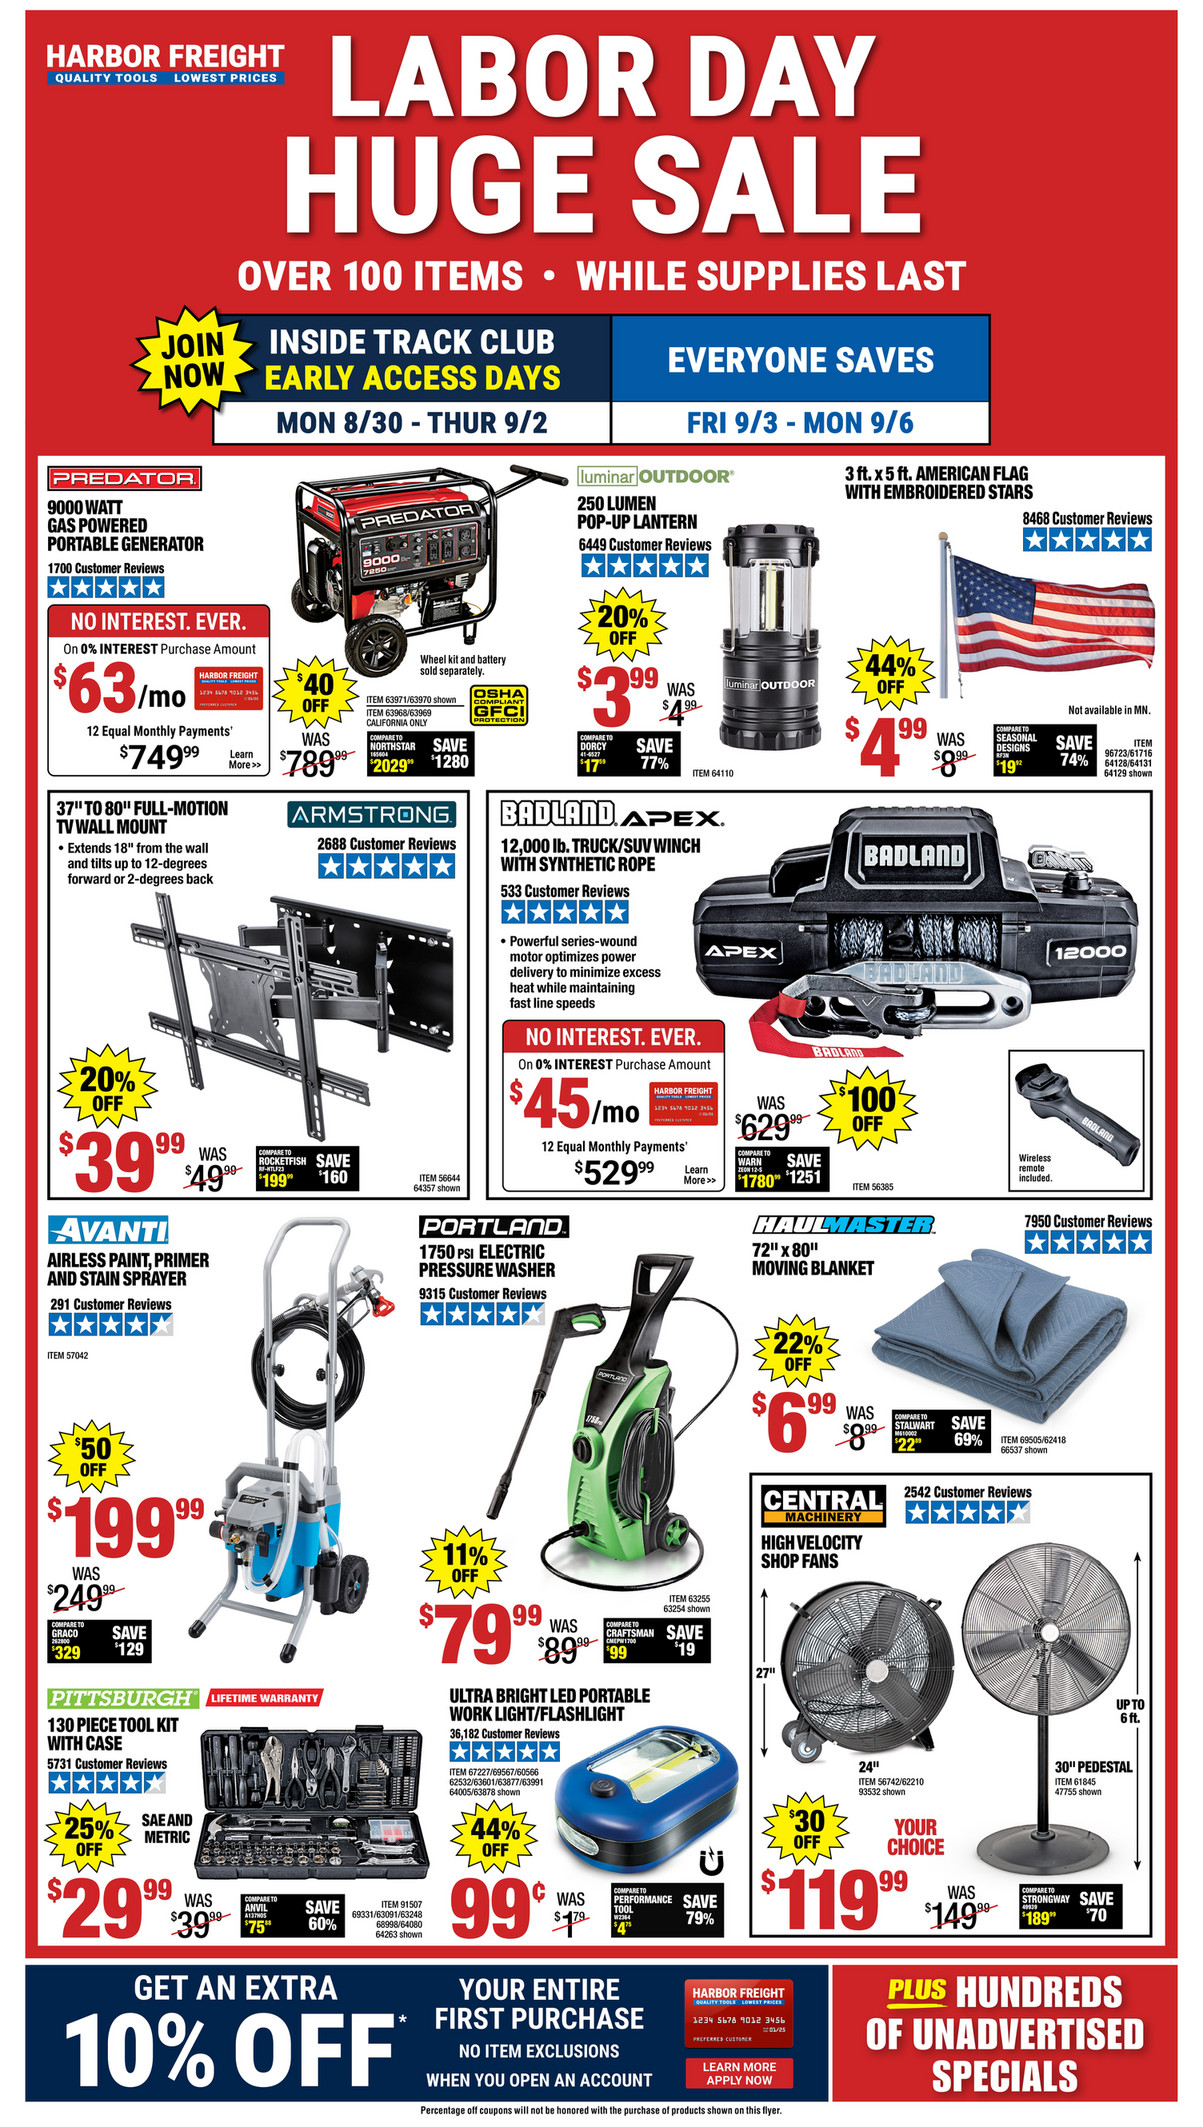 Harbor Freight Tools Labor Day Digital Flyer_sprd_linked Page 1